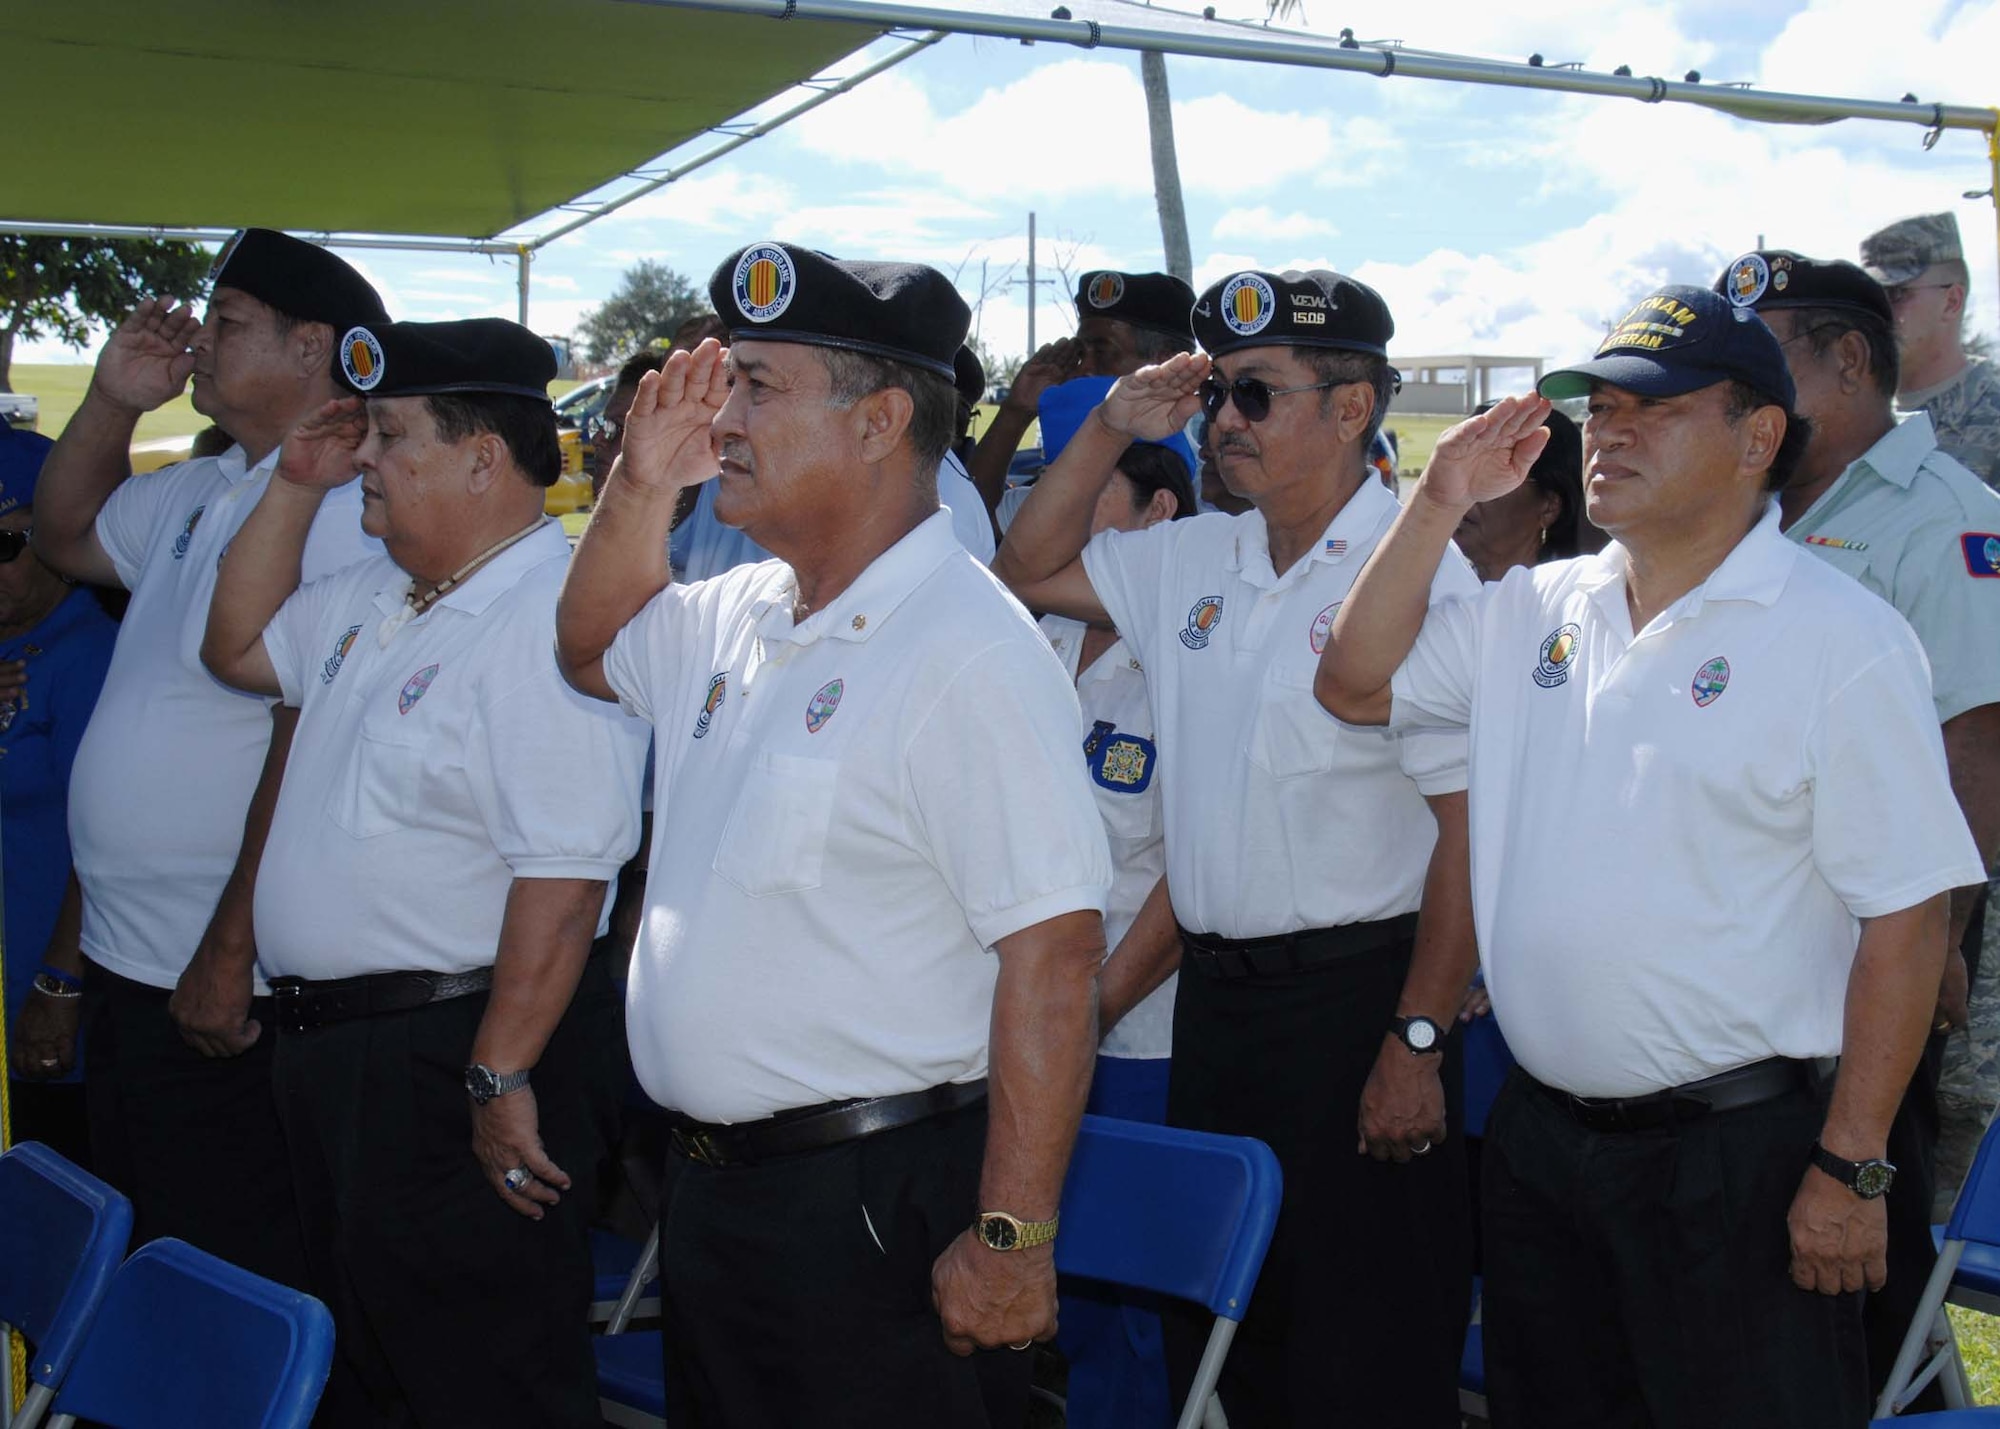 ANDERSEN AIR FORCE BASE, Guam -- Members from the Vietnam Veterans of America salute throughout the National Anthem during the Operation Linebacker II Ceremony at the Arc Light Memorial Park here Dec. 18. The ceremony commemorates its 36th anniversary of the campaign that led to the end of the 11-year Vietnam War. (U.S. Air Force photo by Senior Airman Sonya Croston)